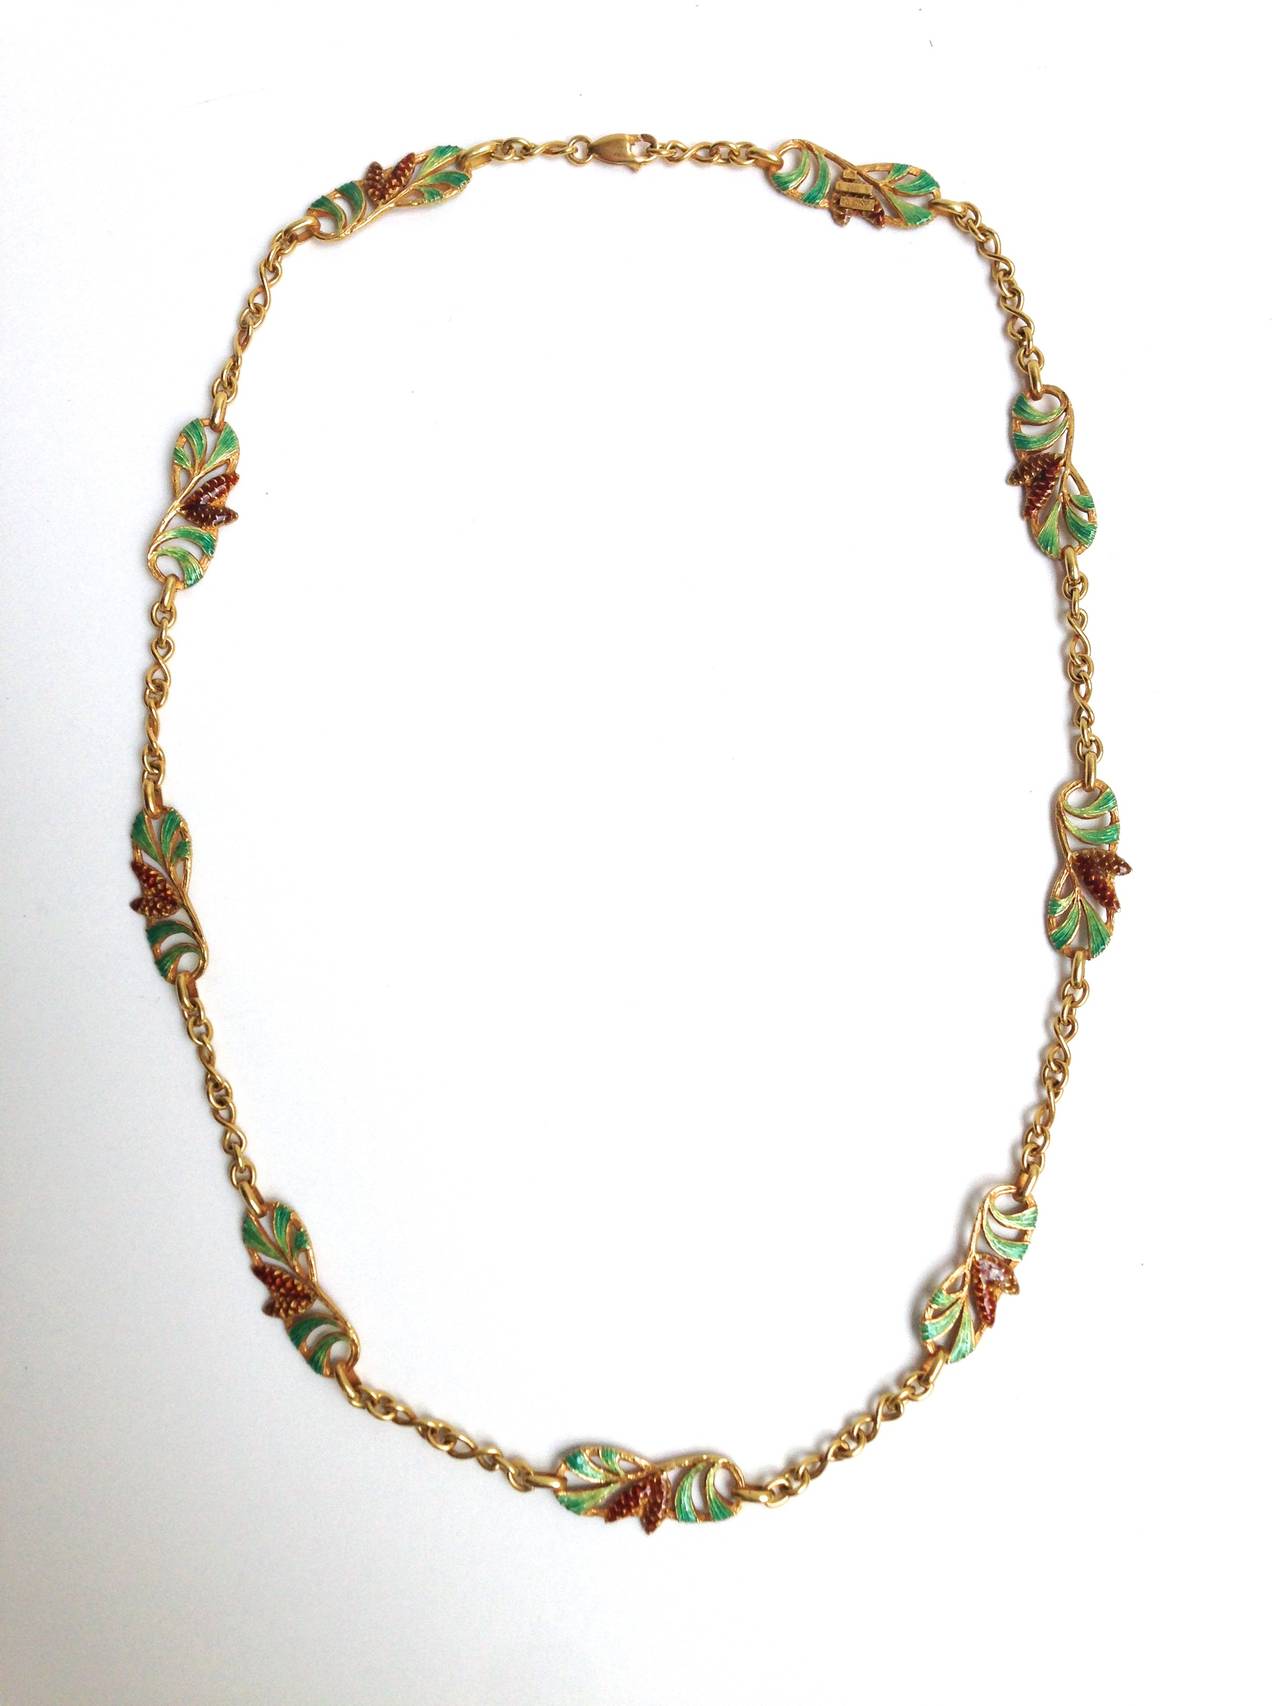 Heavy 18K yellow gold multi color enamel chain necklace by Masriera. Excellent condition, no scratches or damages. Length: 58 cm.